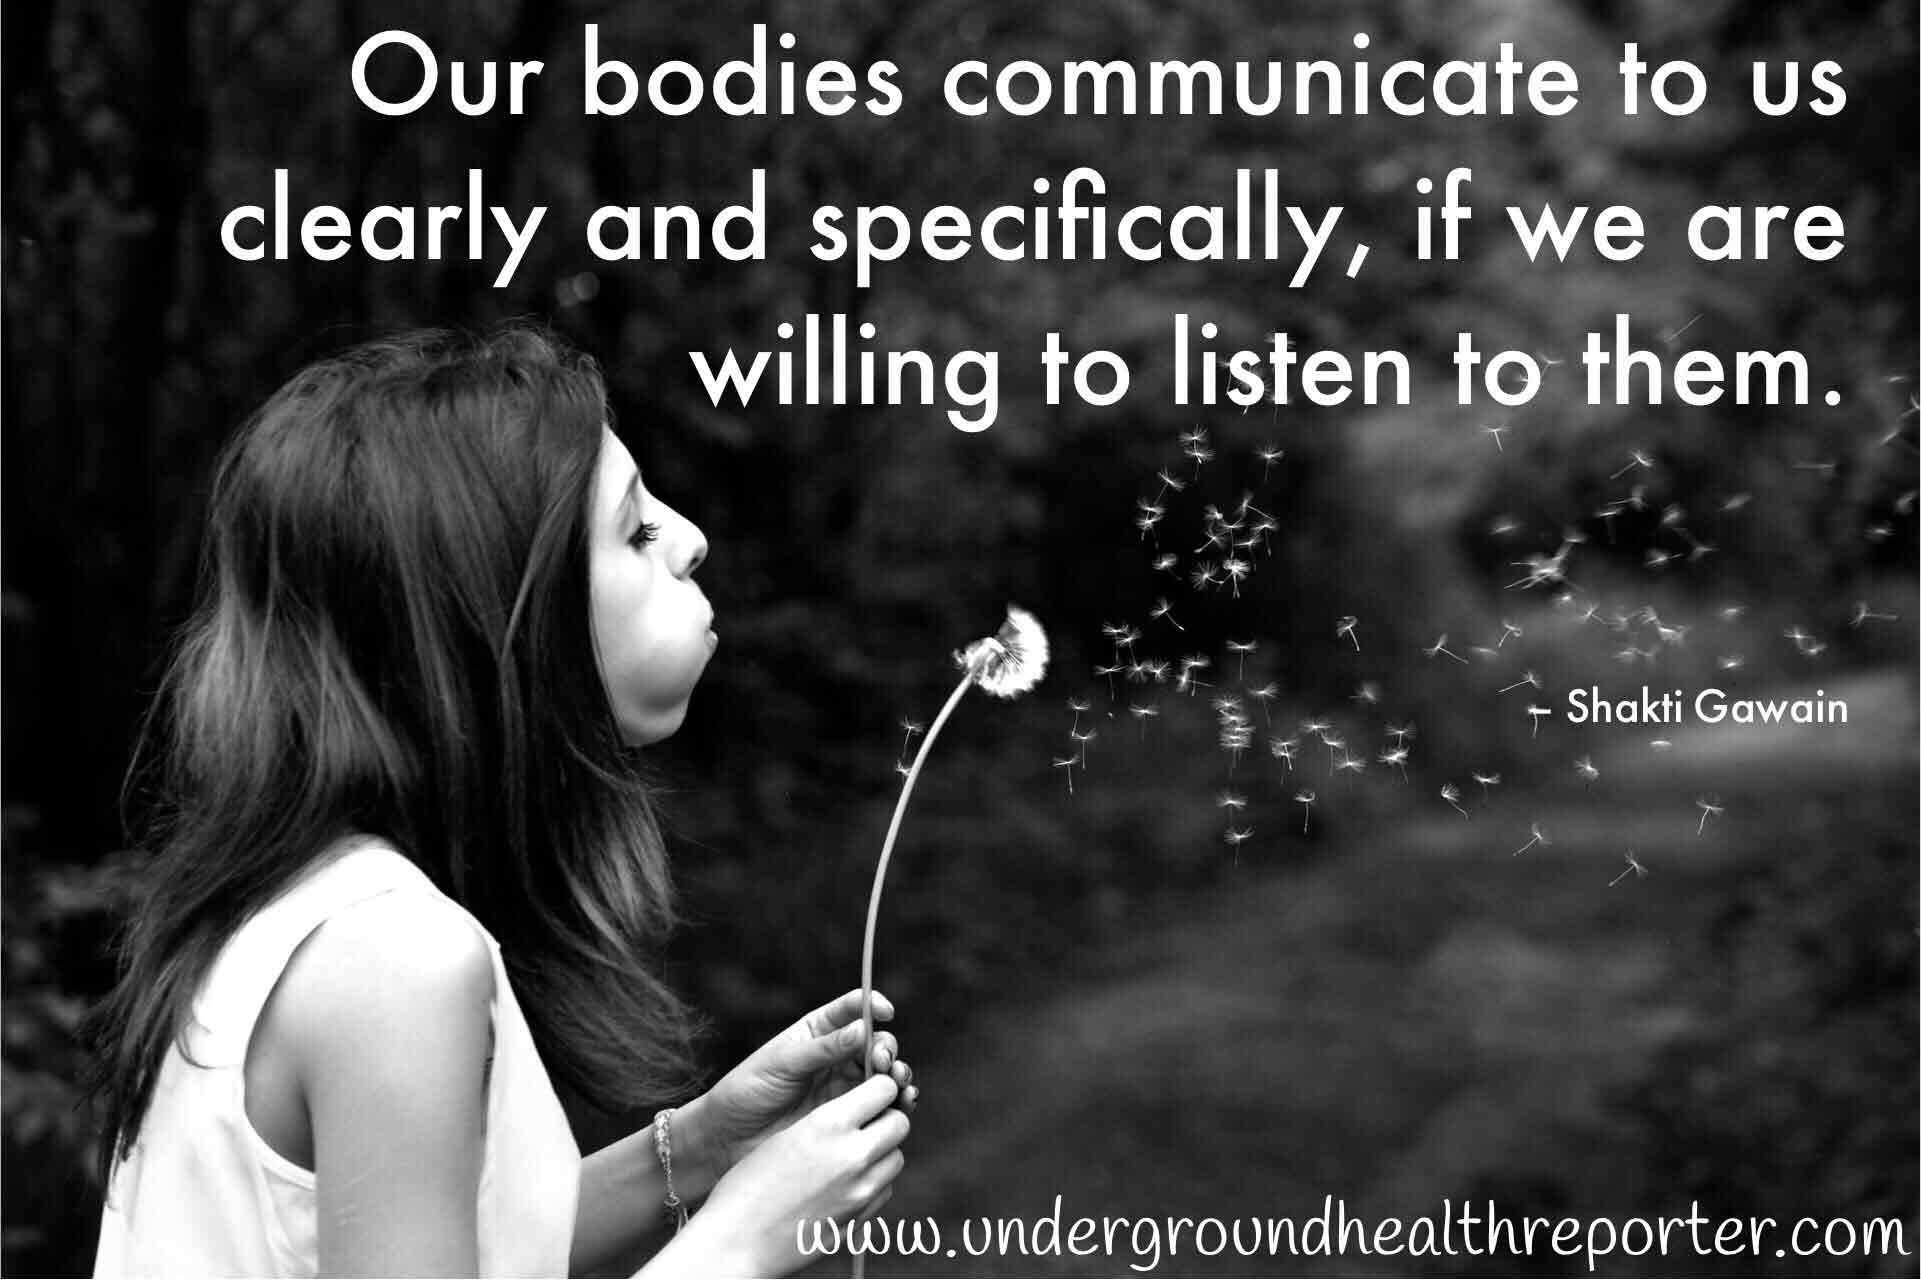 Our bodies communicate with us